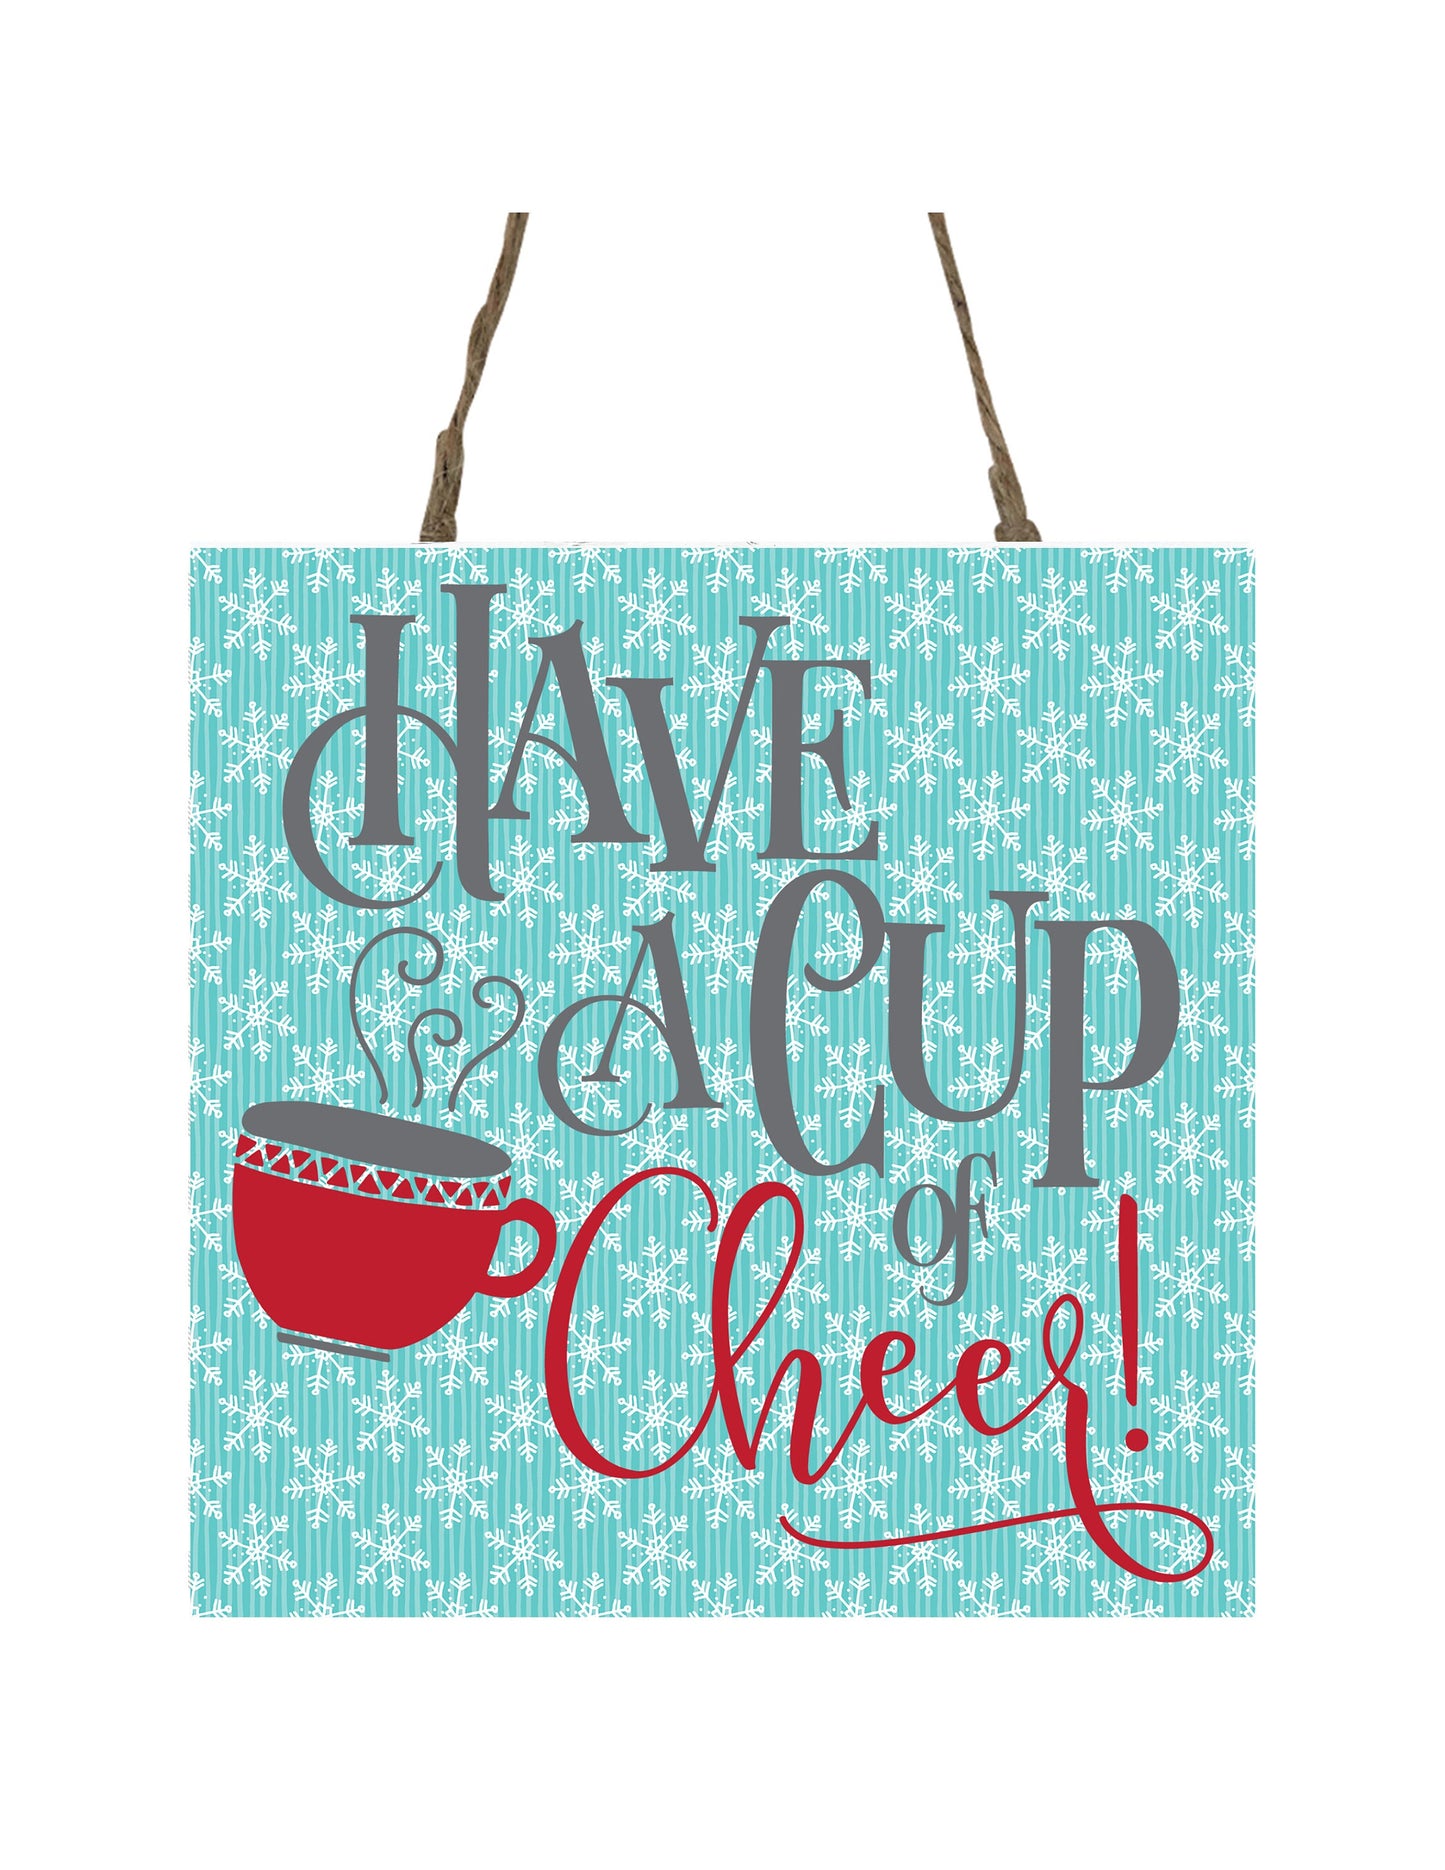 Have a Cup of Cheer Printed Handmade Wood Christmas Ornament Small Sign